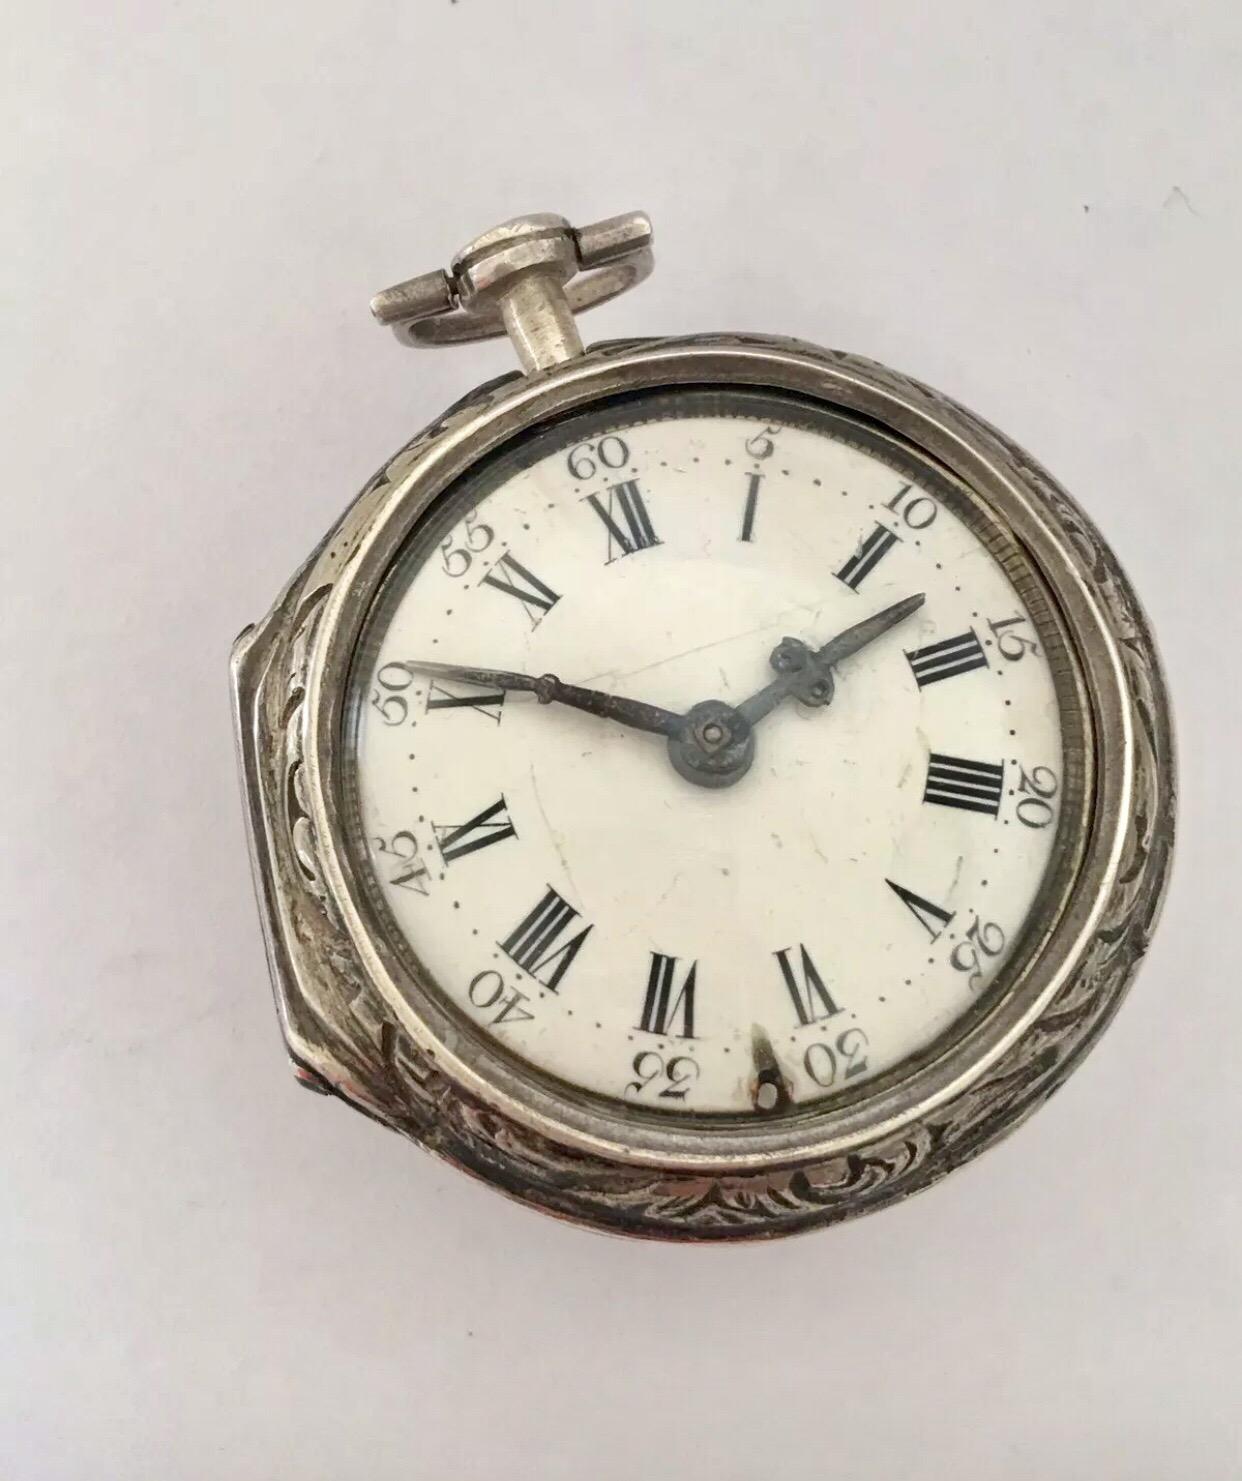 
Early Verge Fusee Repousse Silver Pocket Watch By Thomas Lambford, London c.1768.


This 51mm diameter pocket watch is not working. I'm selling it for repair or restoration. Please study the images carefully as part of the description.